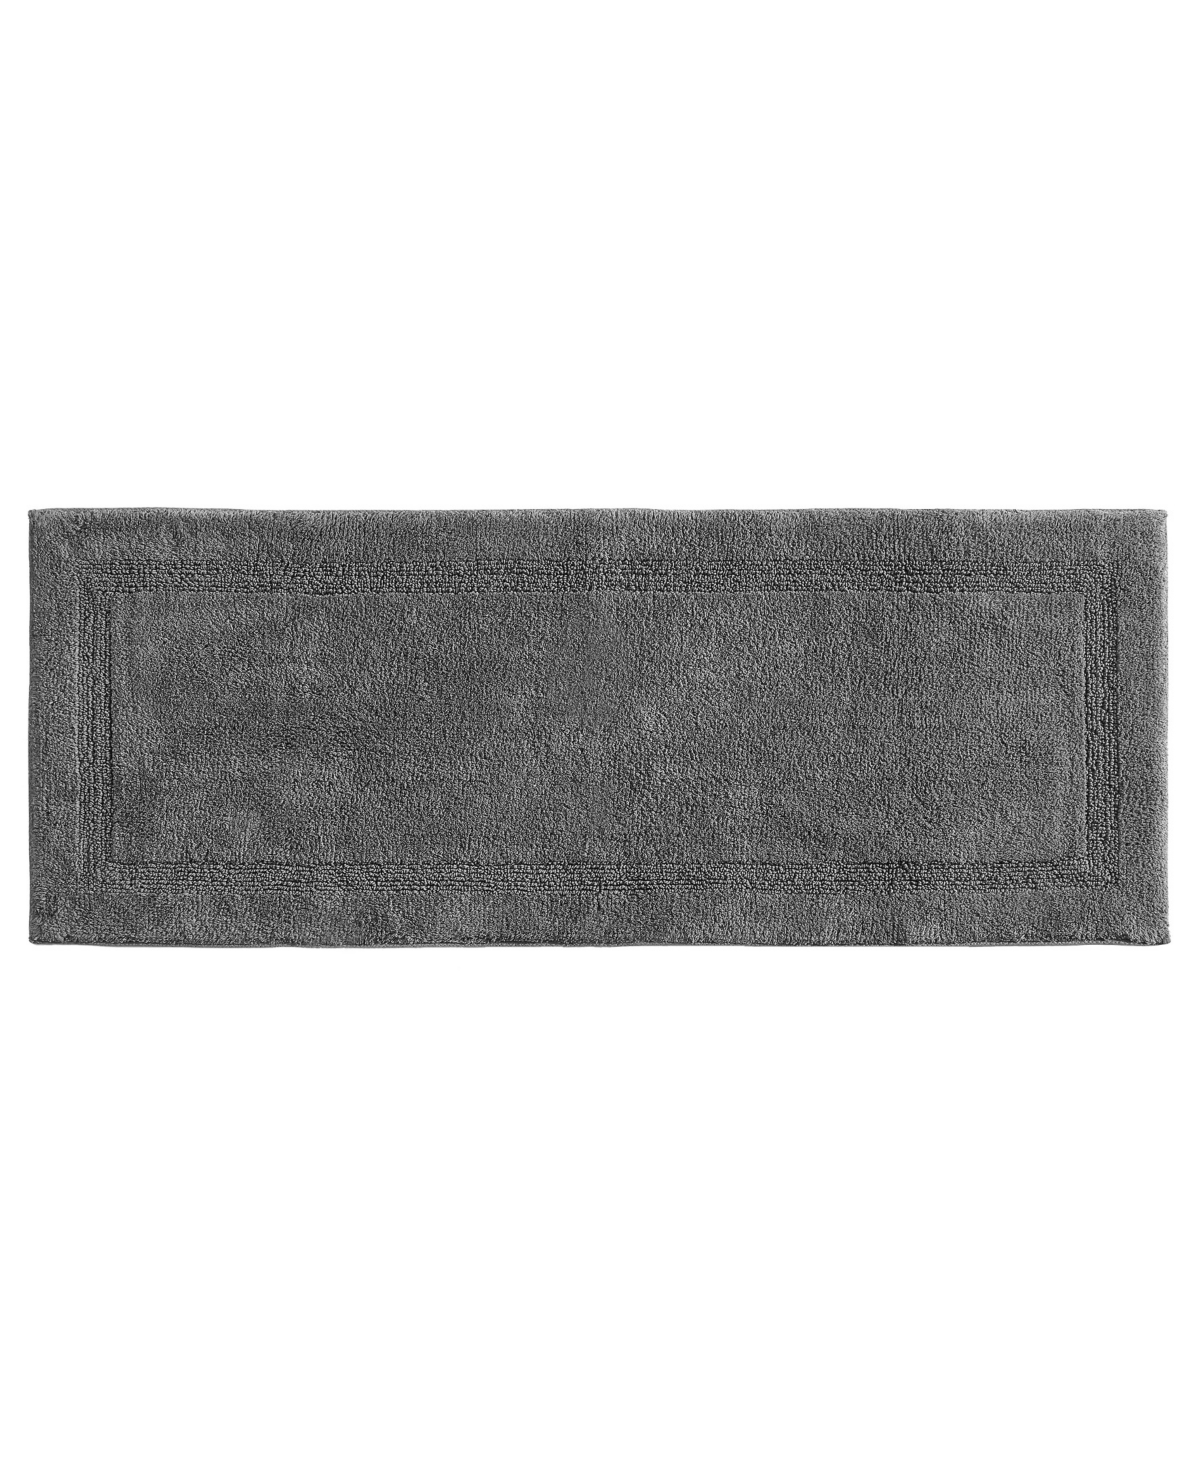 Nautica Peniston Solid Cotton Tufted Bath Runner Rug, 60" X 22" In Moorings Gray